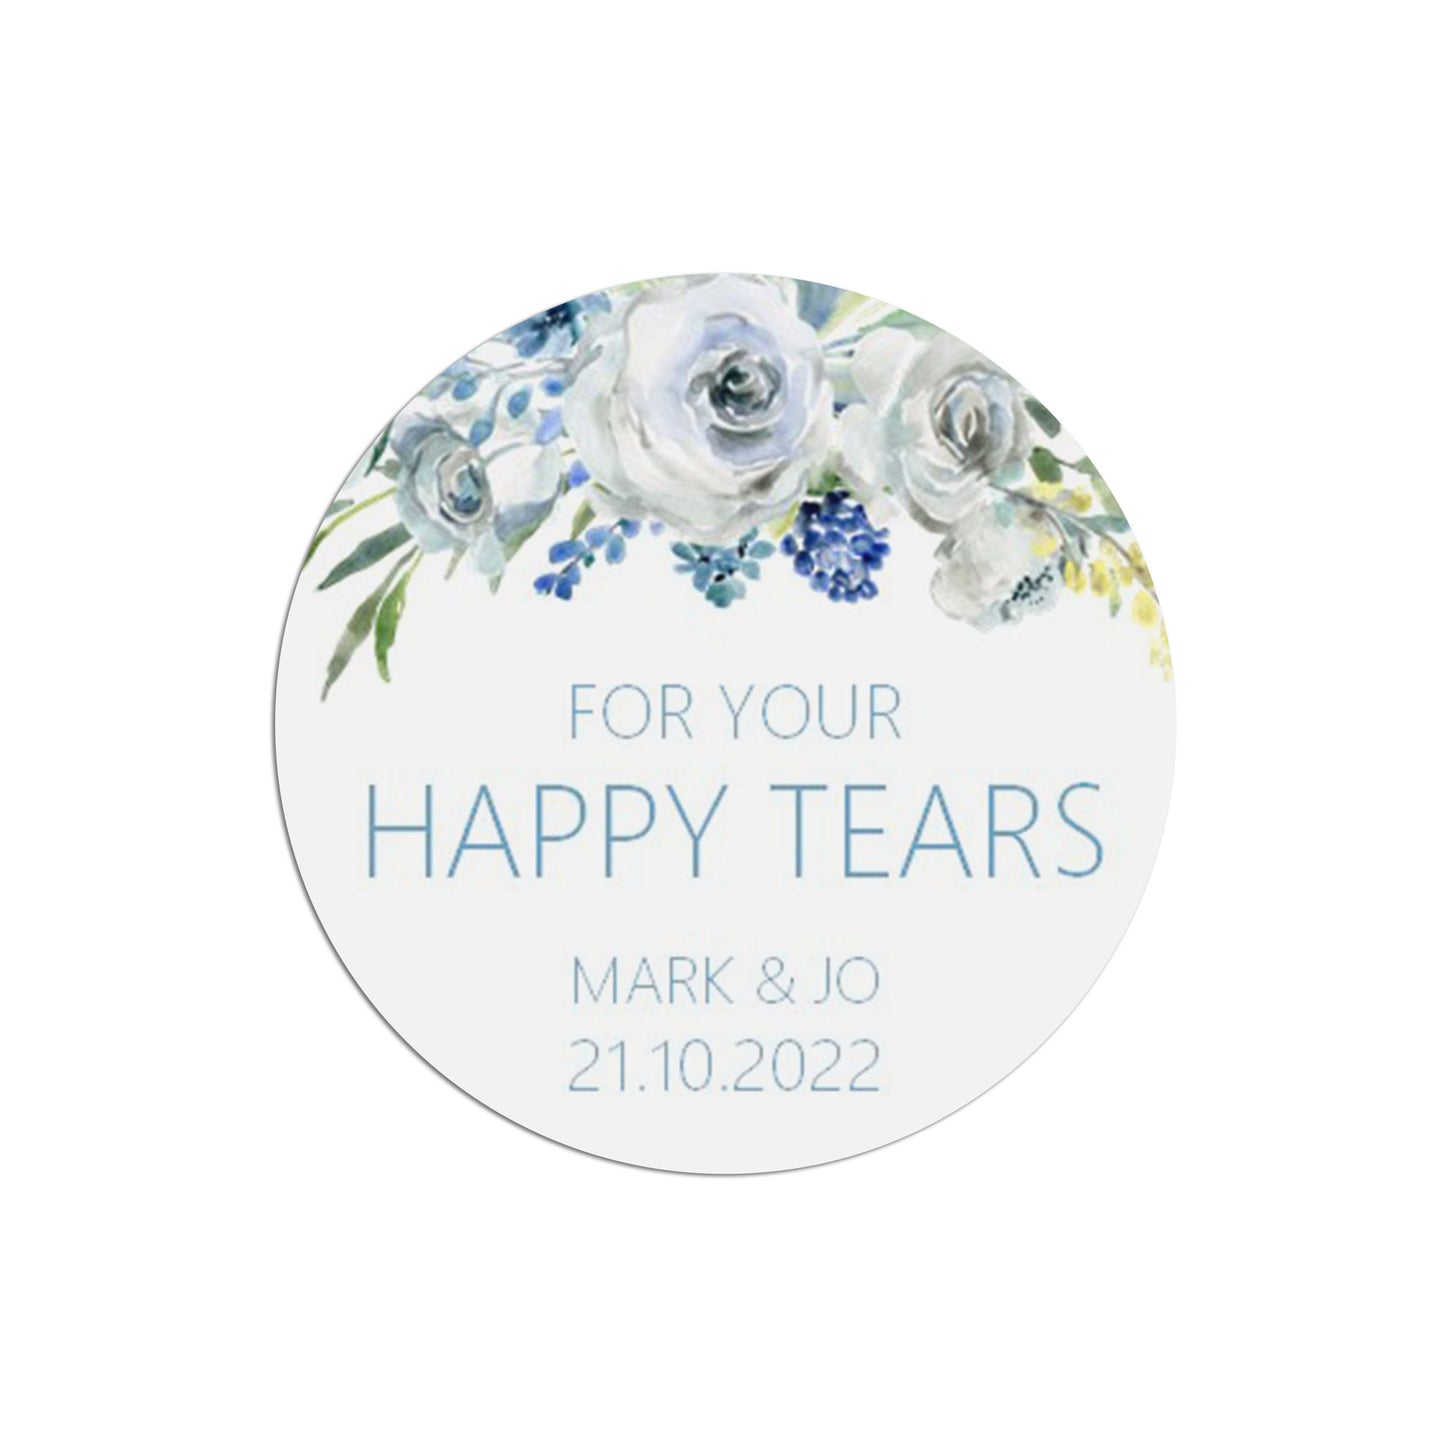 Happy Tears Tissue Wedding Stickers - Blue Floral